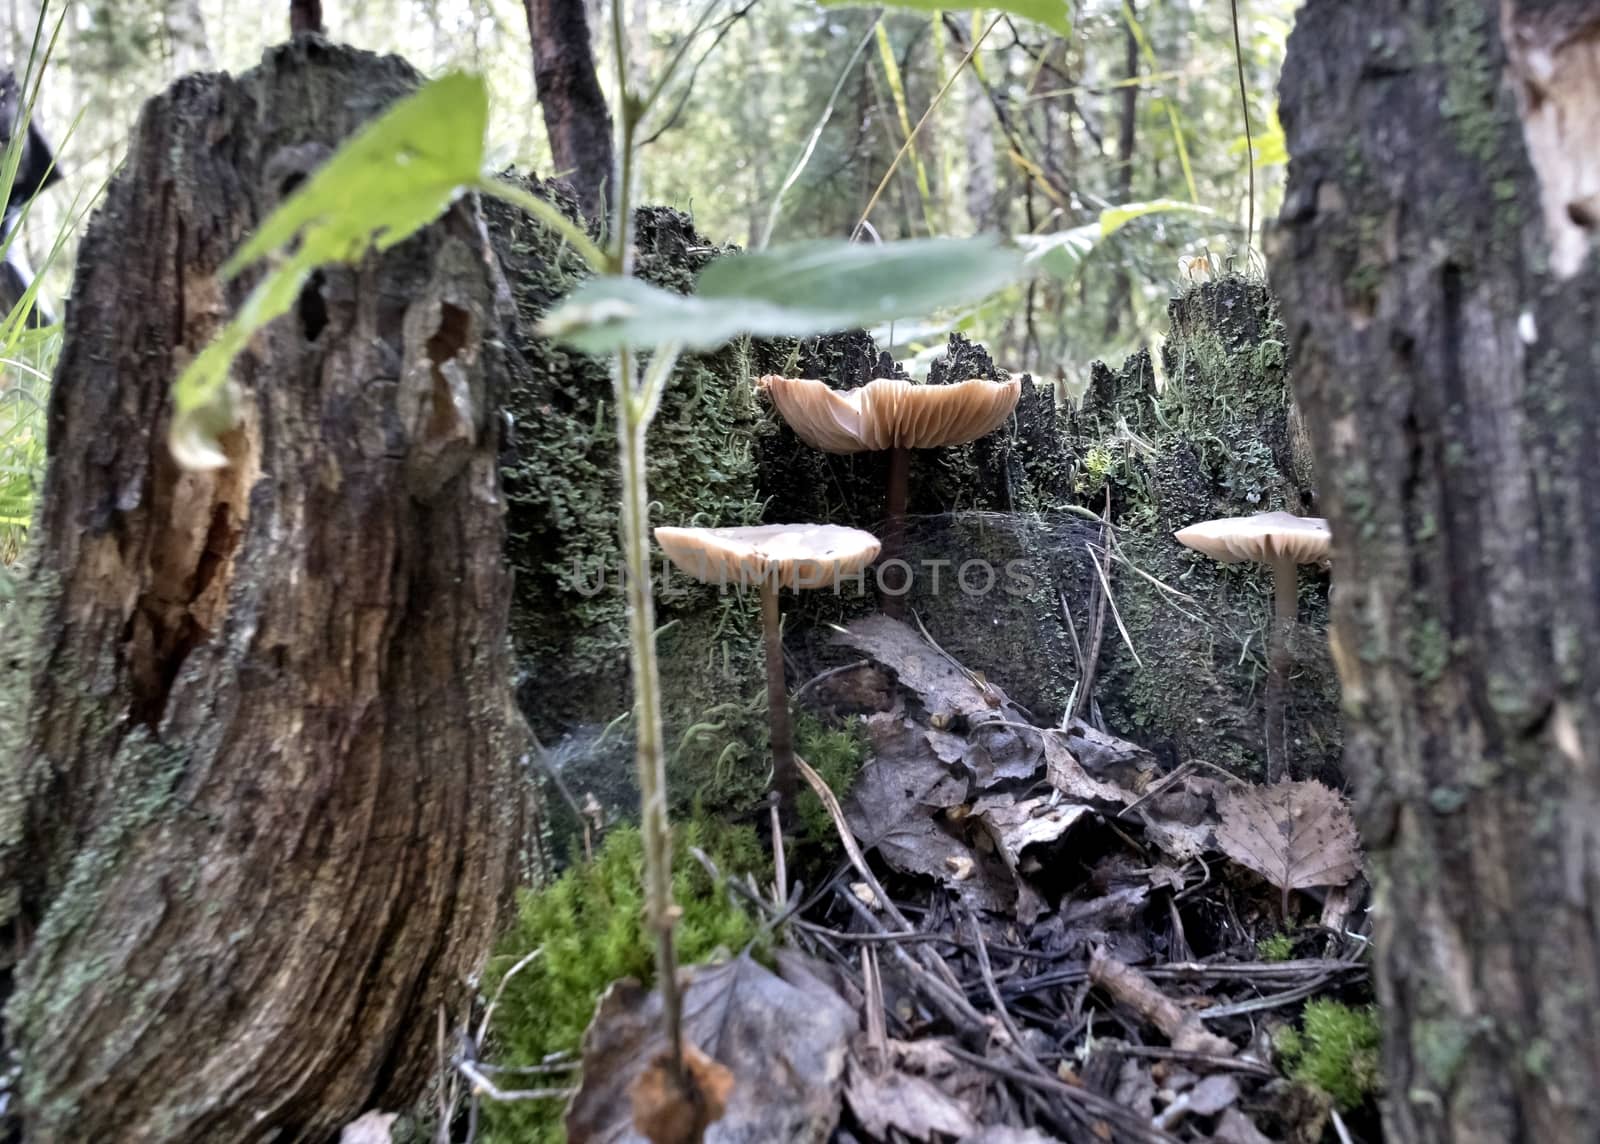 several young mushrooms grow near the roots of the tree